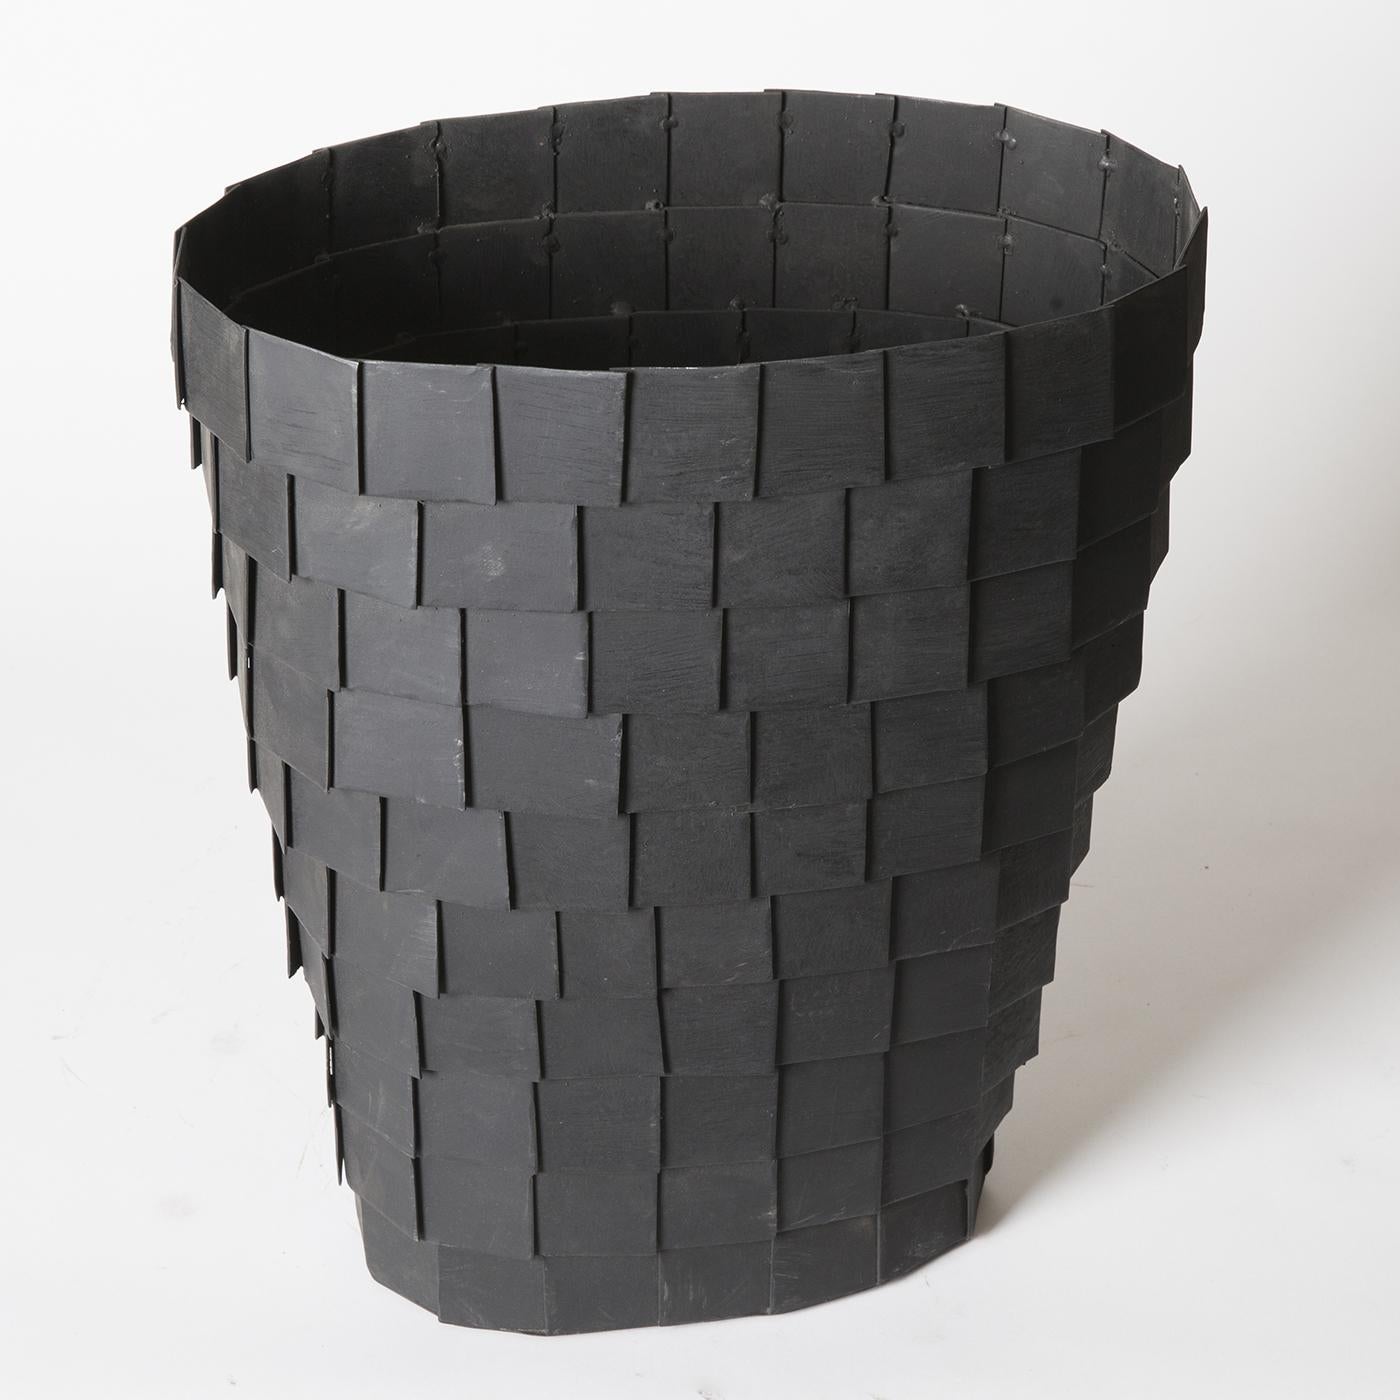 This dramatic piece by Sciortino is a truncated cone vase sculpture in panels of sheet iron, painted matte black to retain the impression of rough metal. 




       